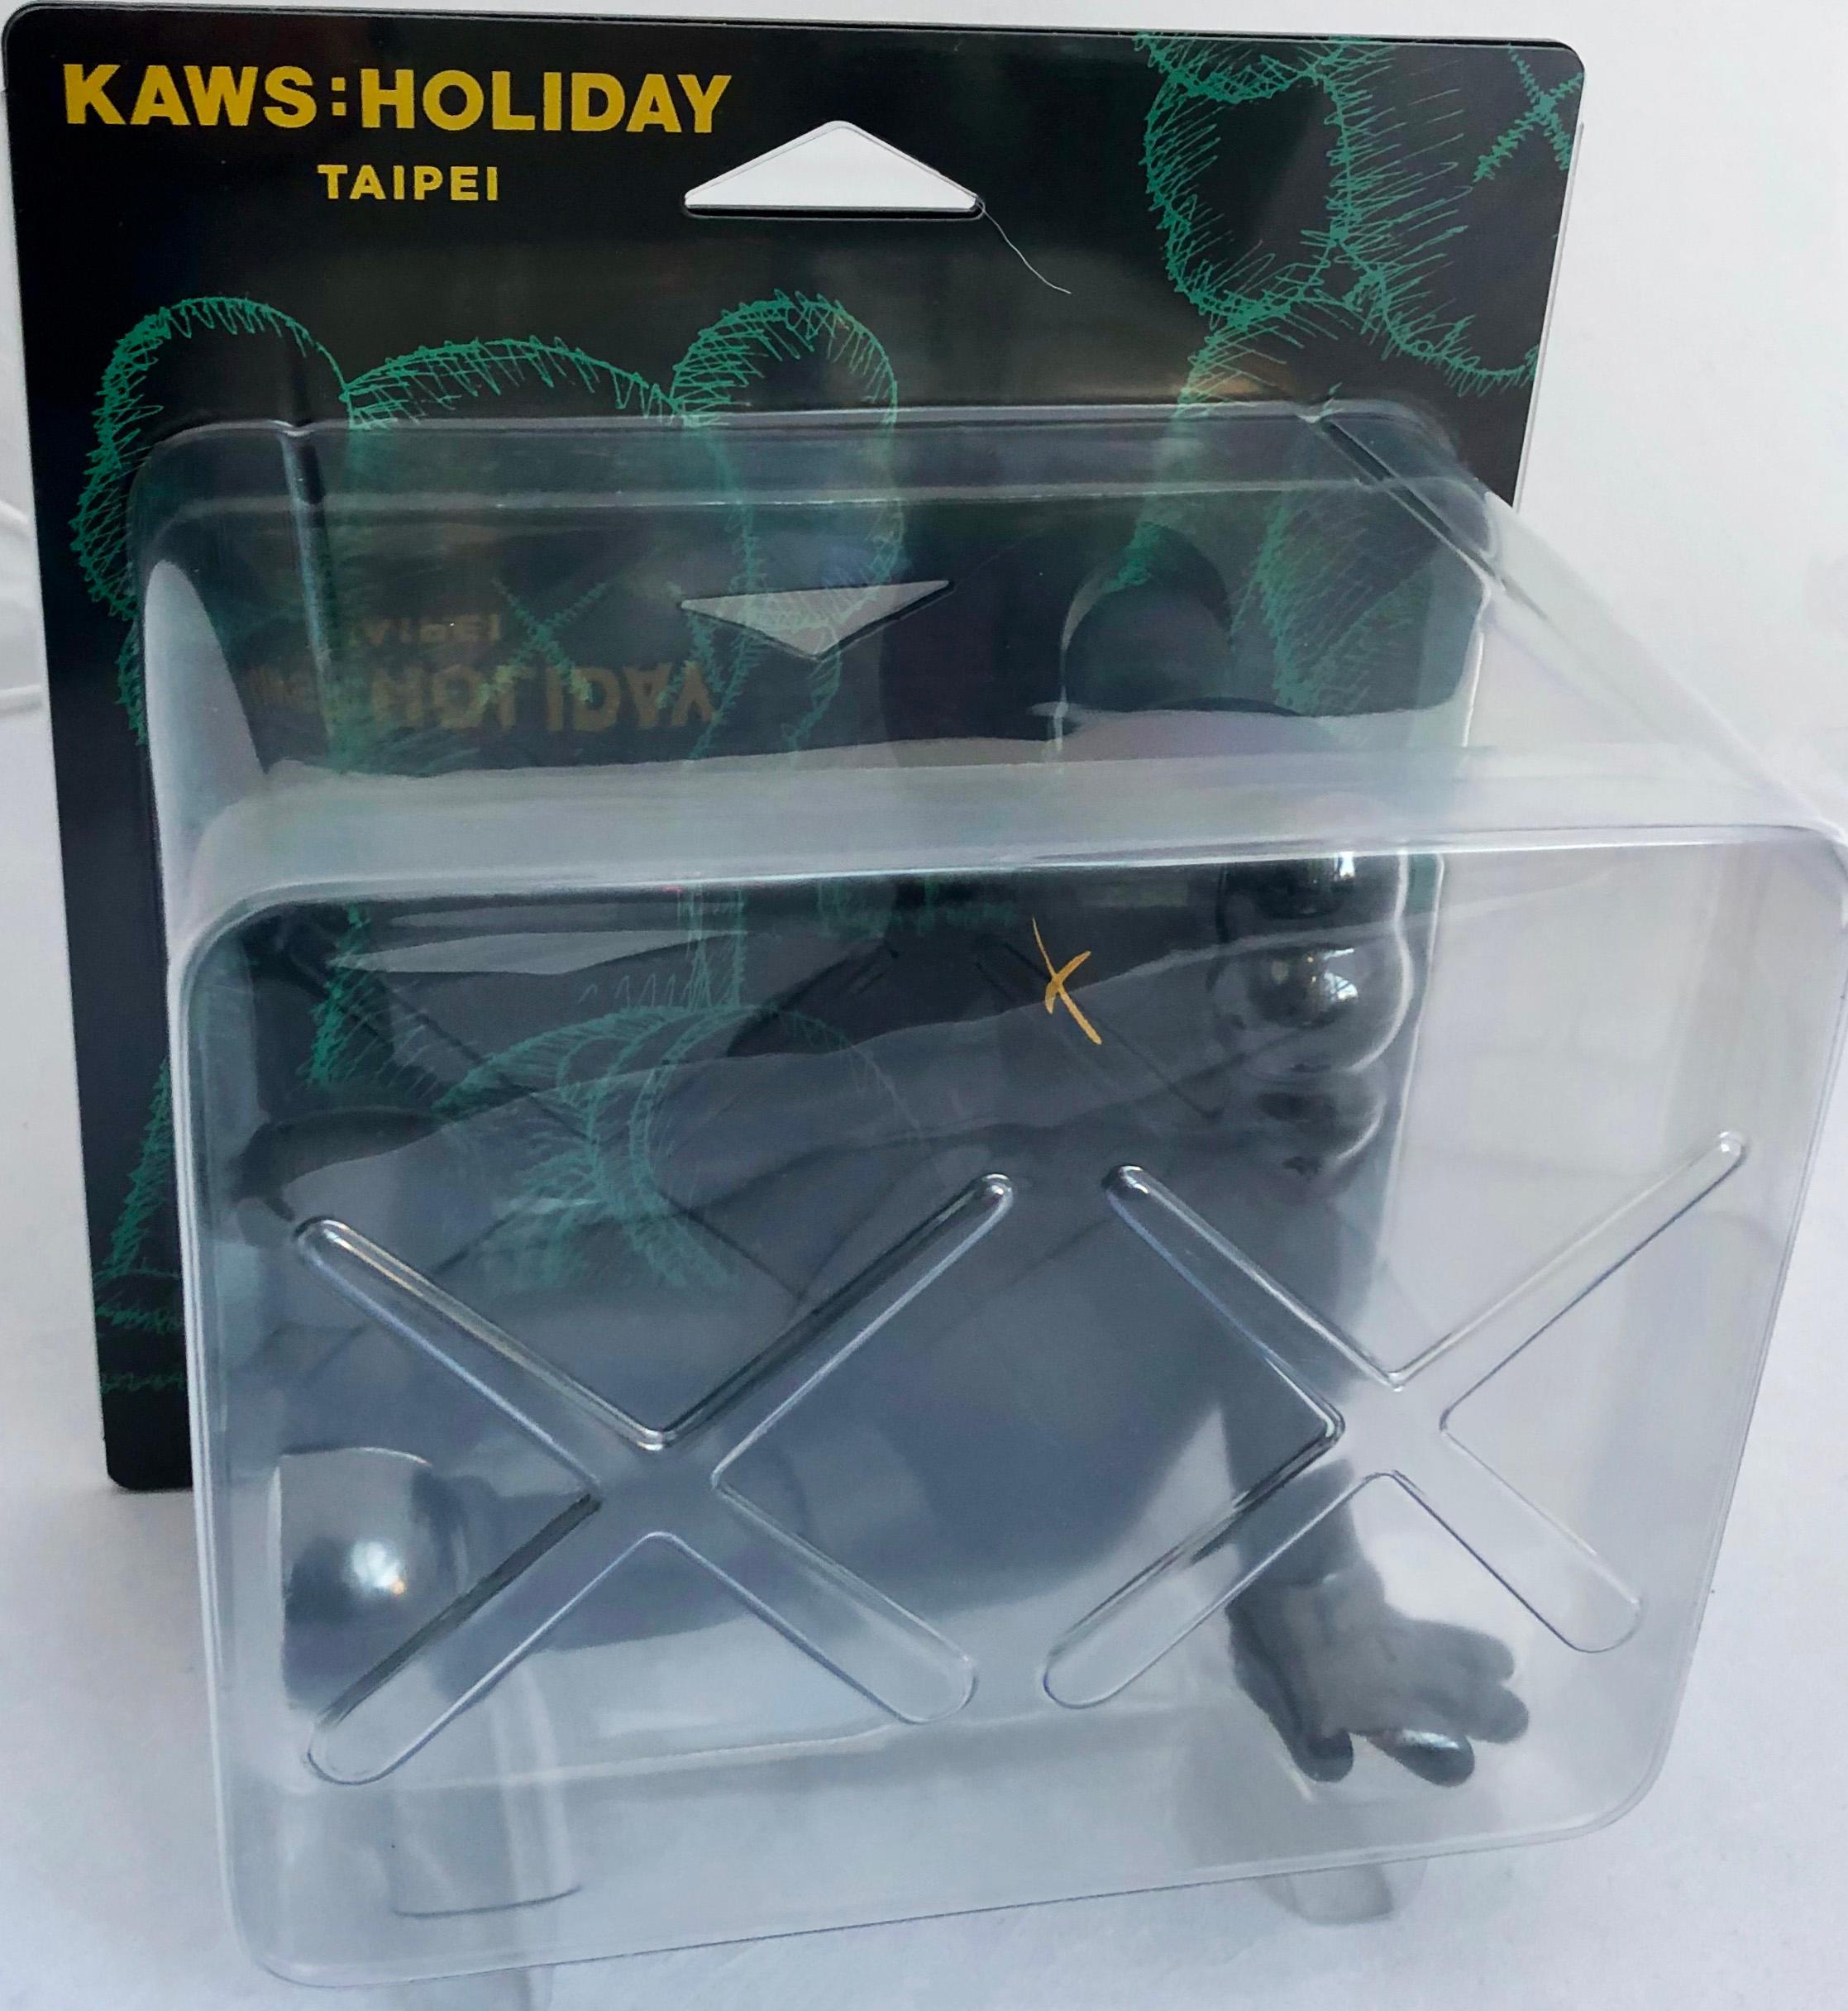 KAWS Black Holiday Companion (KAWS Taipei):
This figure features KAWS' signature character COMPANION in a resting seated position. KAWS Holiday Taipei was published in 2019 to commemorate the debut of KAWS’ largest sculptural endeavor to date: a 36